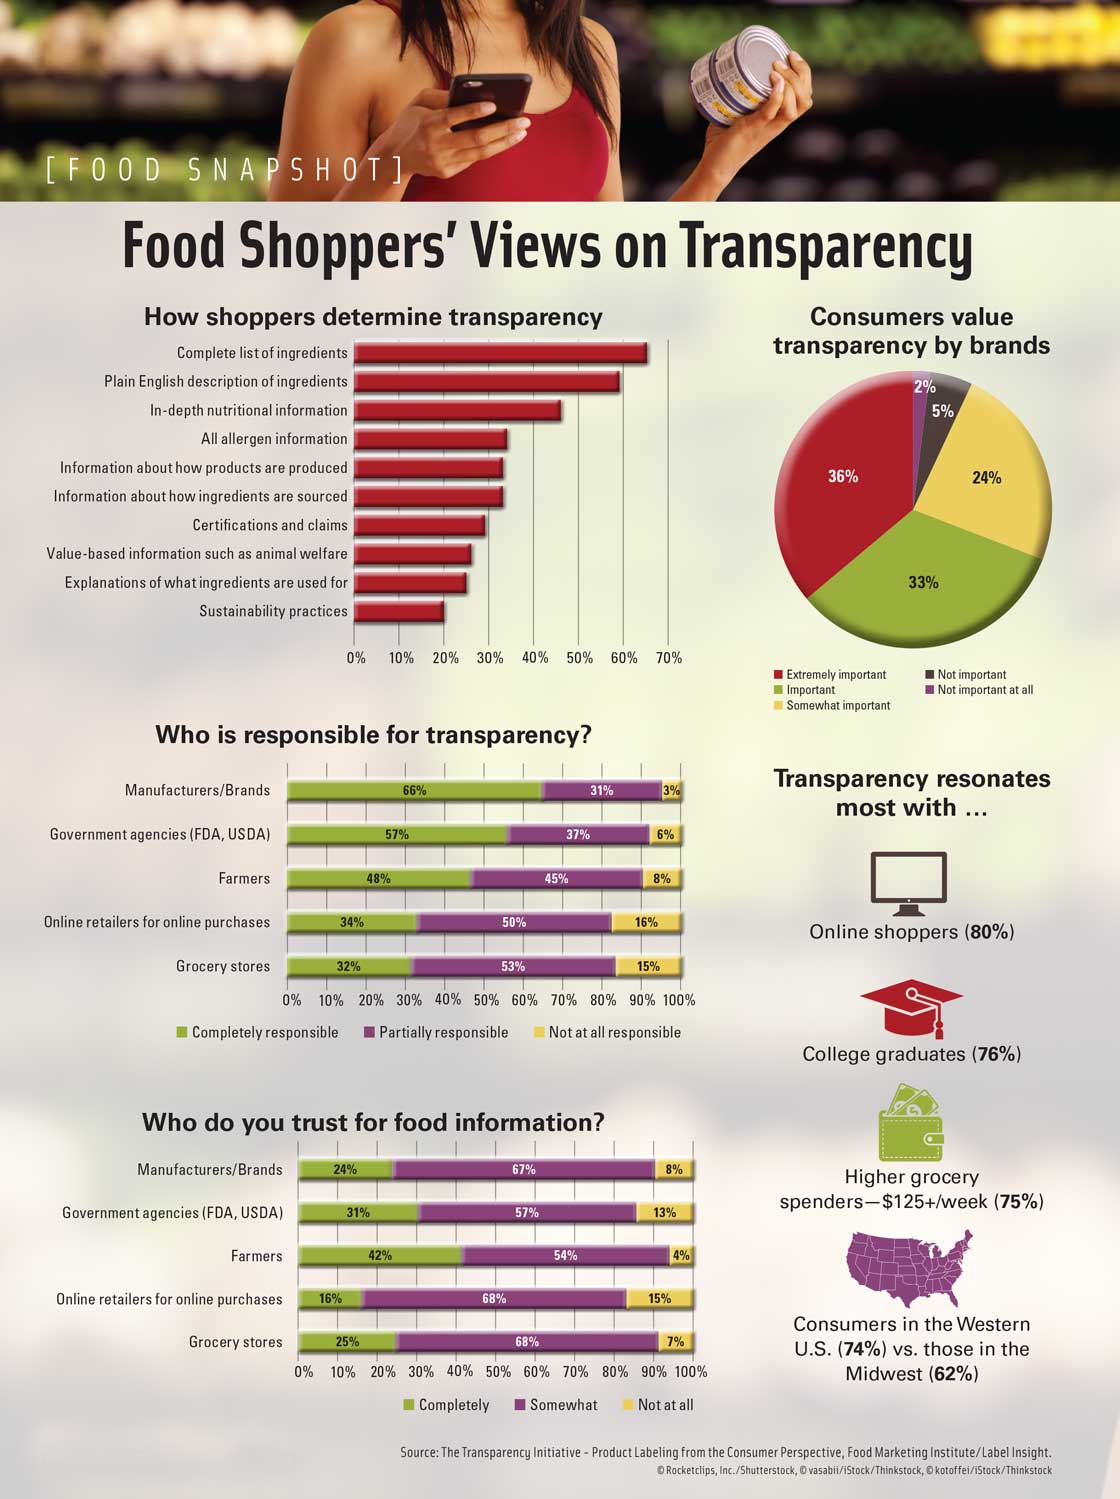 Food Shoppers’ Views on Transparency. Source: The Transparency Initiative - Product Labeling from the Consumer Perspective, Food Marketing Institute/Label Insight.